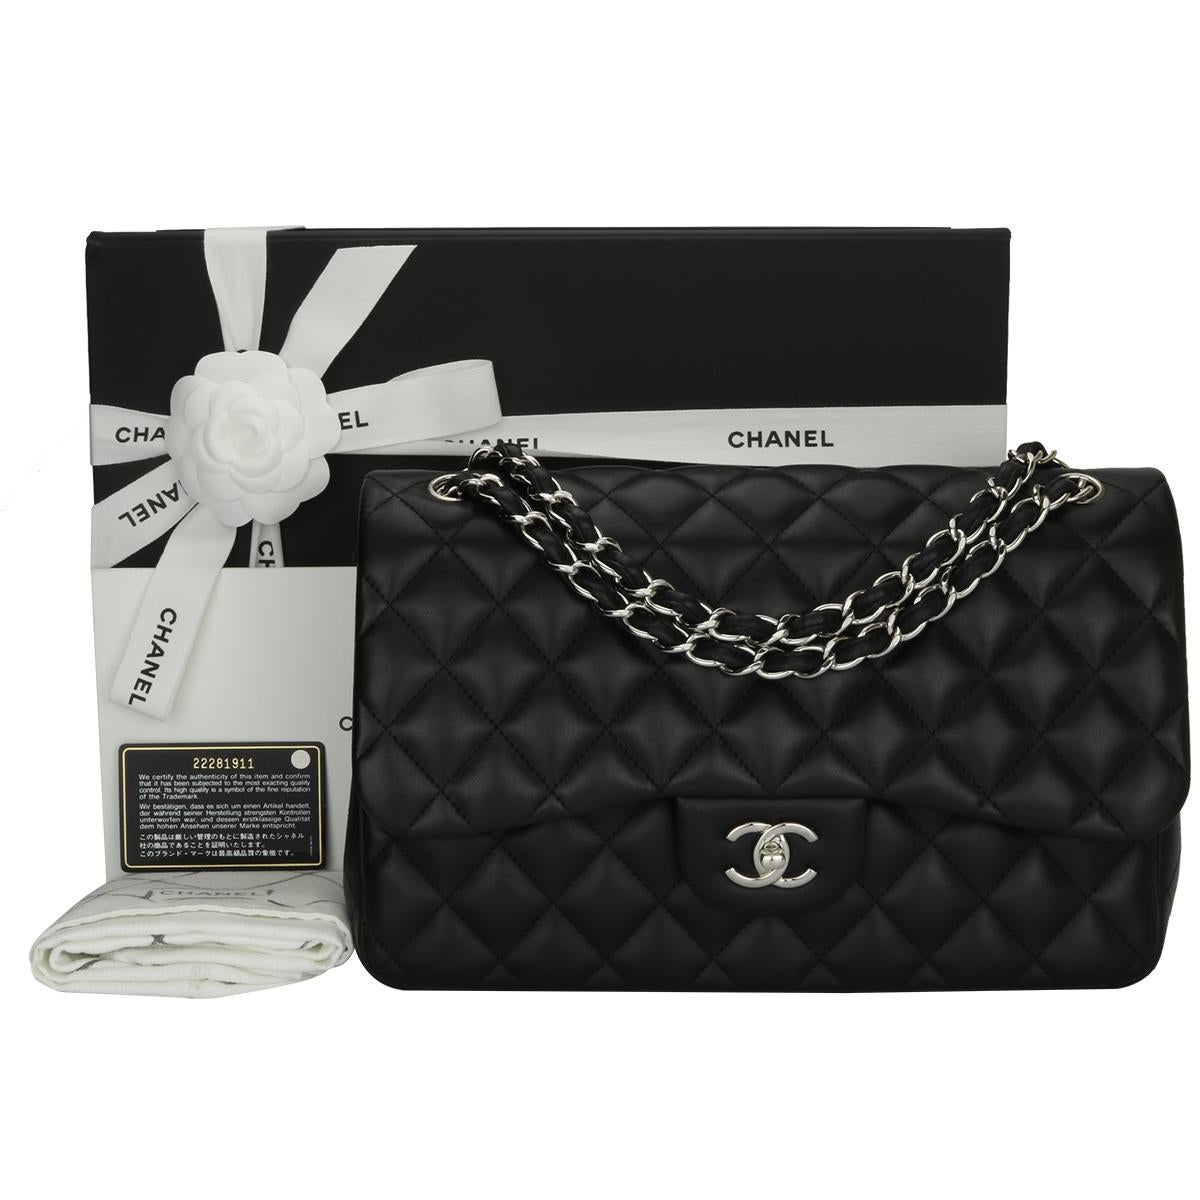 Authentic CHANEL Classic Jumbo Double Flap Black Lambskin with Silver Hardware 2016.

This stunning bag is in excellent condition, the bag still holds its original shape, and the hardware is still very shiny.

Exterior Condition: Excellent